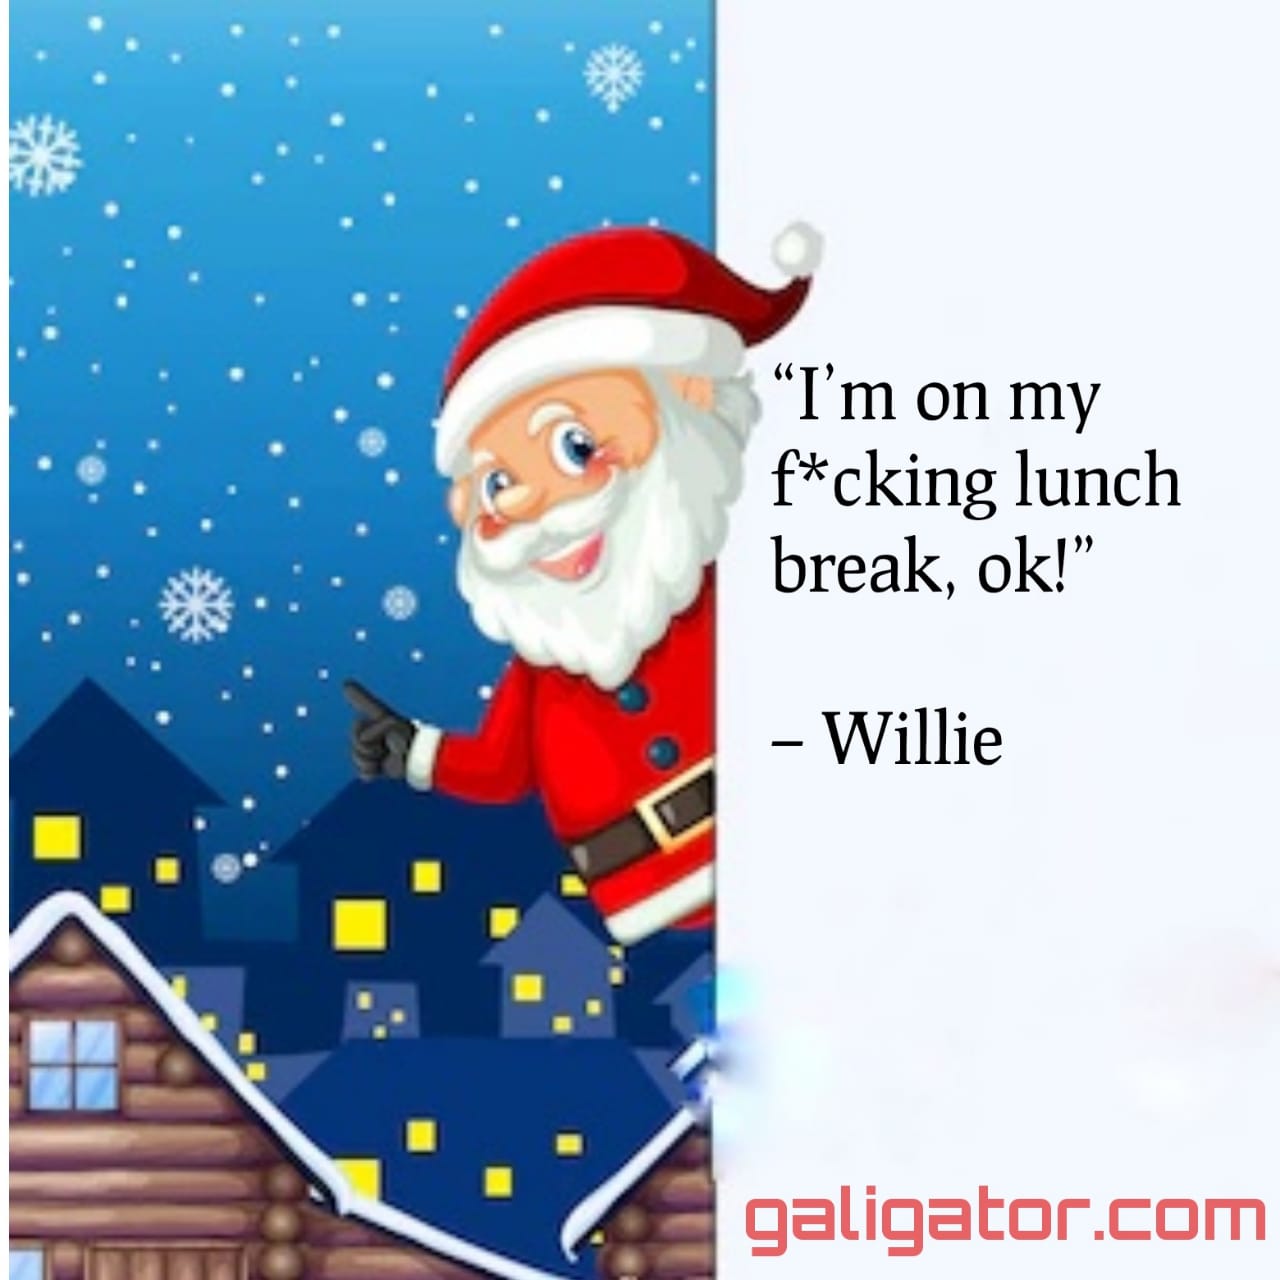 bad santa quotes, quotes from bad santa, bad santa movie quotes, bad santa 2 quotes, bad santa funny quotes, quotes from bad santa, bad santa funny quotes, bad santa movie quotes, bad santa quotes sandwiches, bad santa 2 quotes, bad santa fornicate quote, bad santa christmas quotes, best bad santa quotes,  bad santa are you messing with me , bad santa they can t all be winners ,